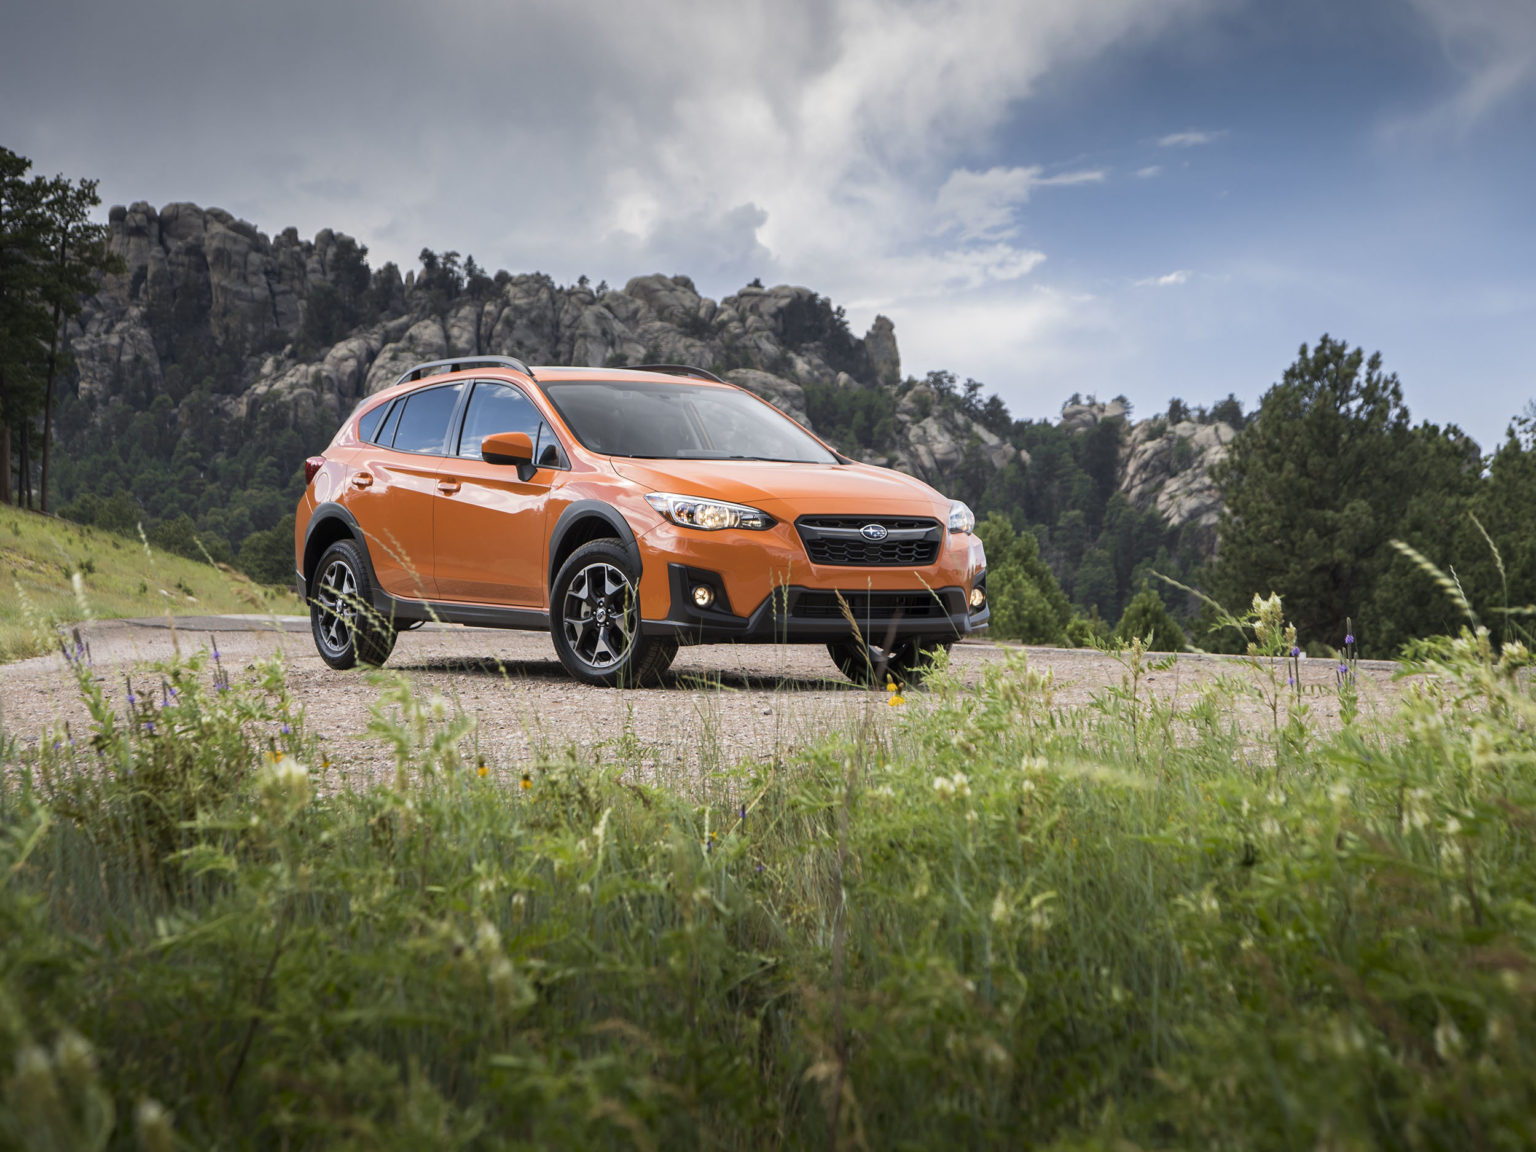 A new report by AutomotiveNews indicates that Subaru is adding a new 2.5-liter engine option to its lineup.